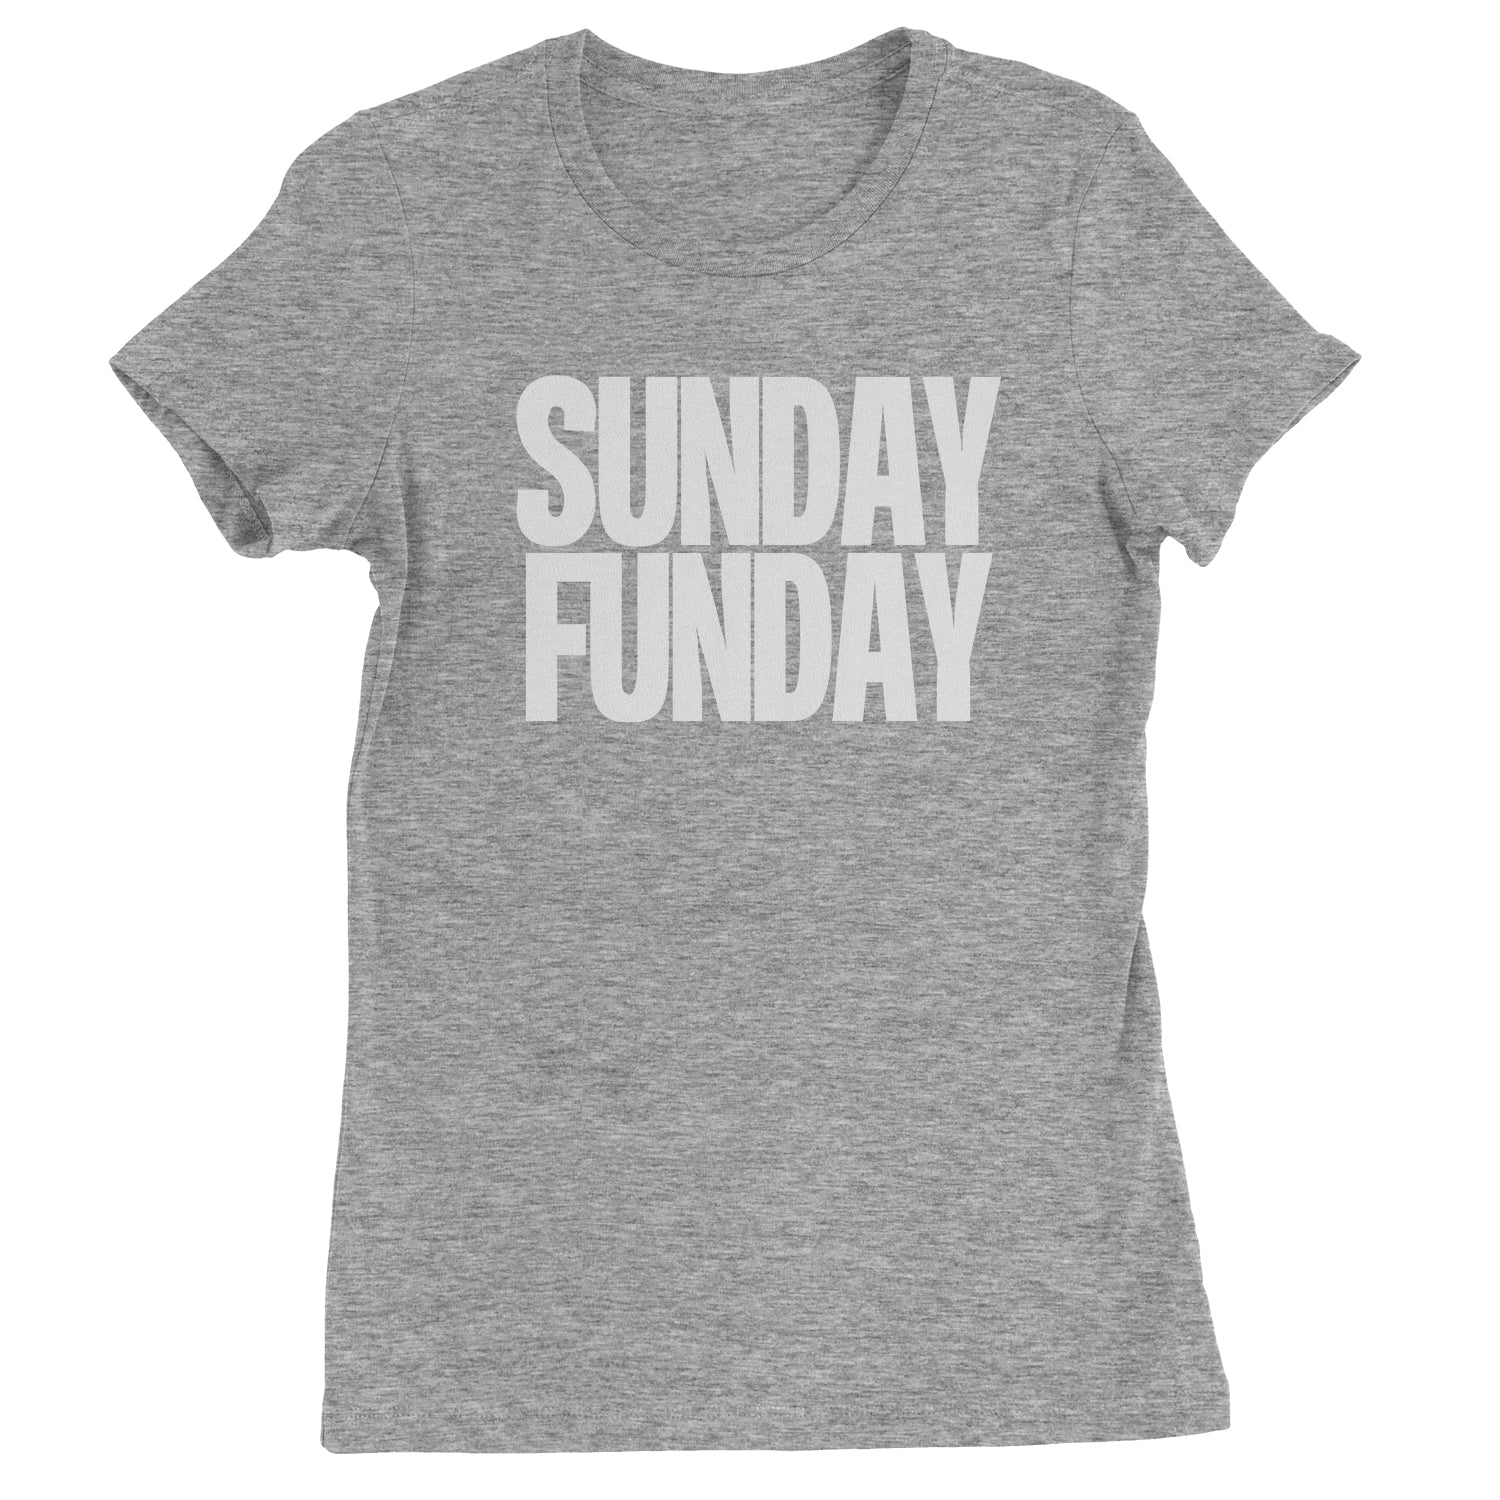 Sunday Funday Womens T-shirt day, drinking, fun, funday, partying, sun, Sunday by Expression Tees